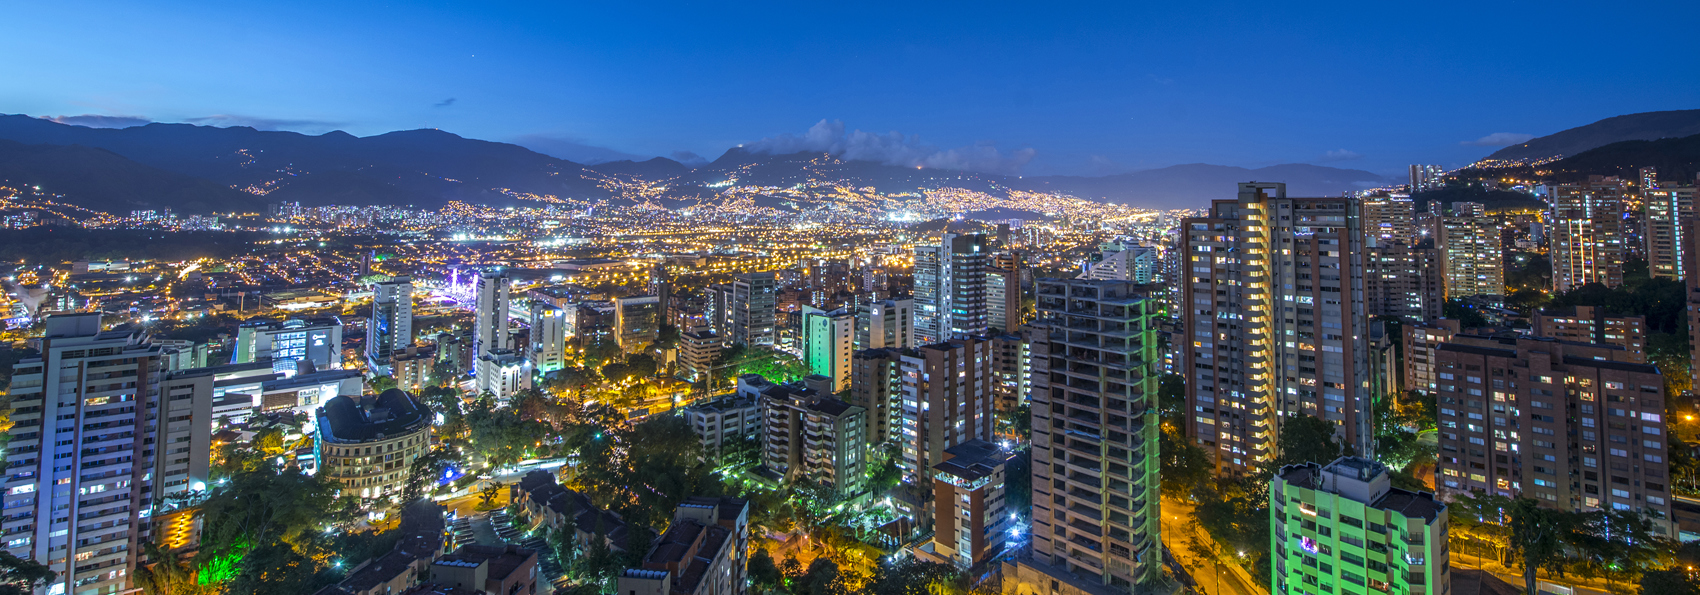 colombia - colombia_medellin_skyline_01